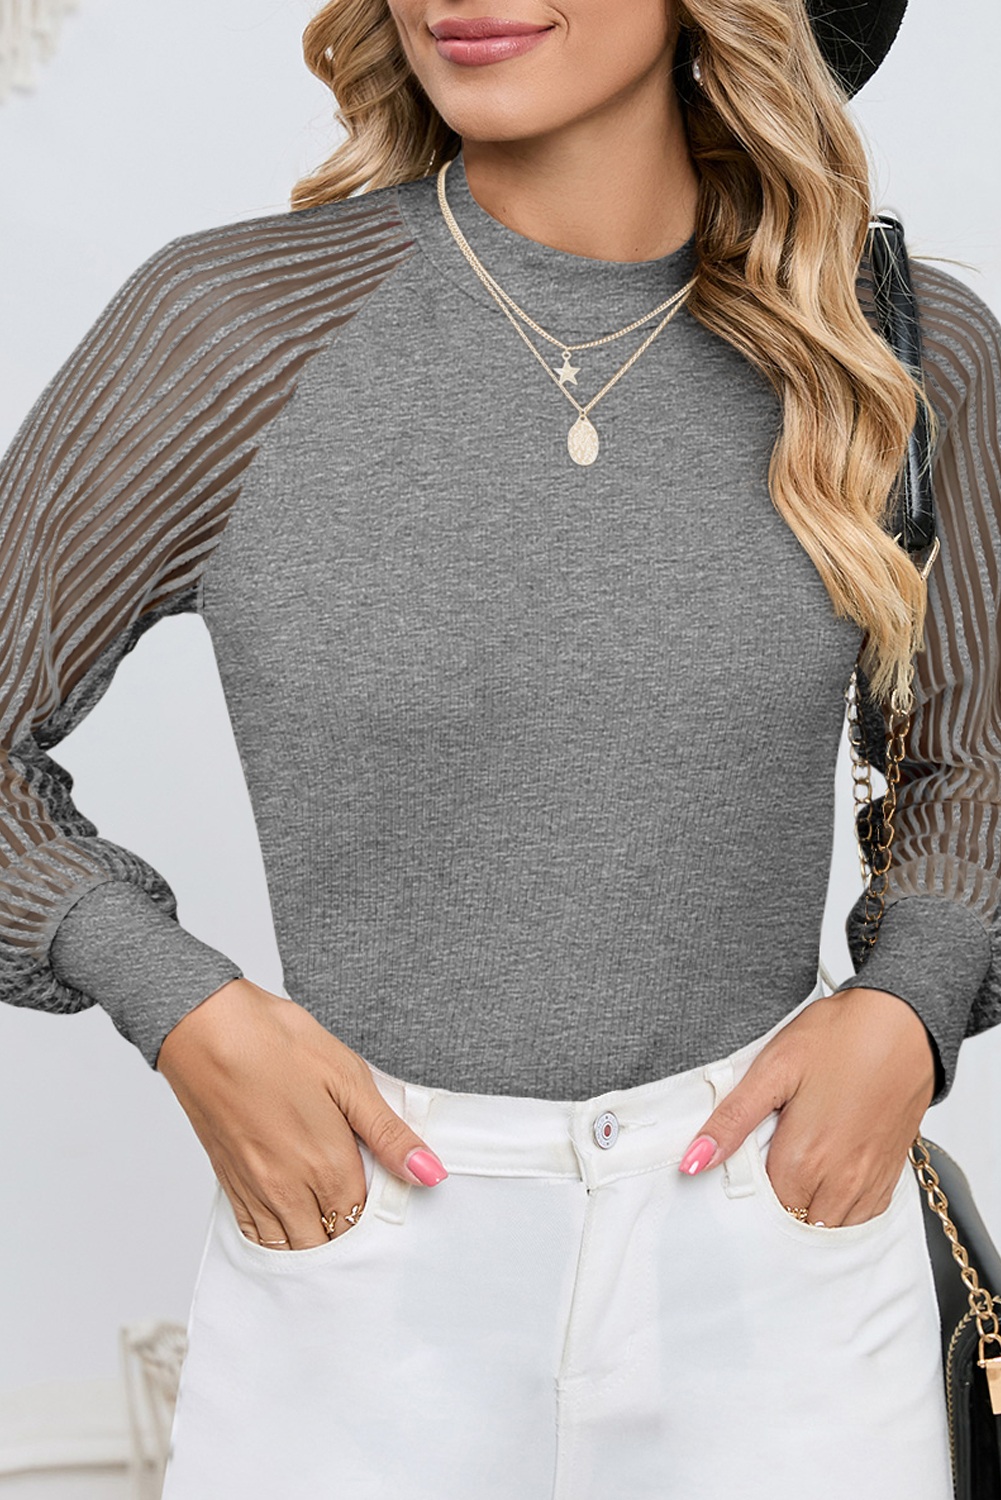 Shewin Wholesale WESTERN Clothing  Gray Basic Crew Neck Dressy Striped Mesh Long Sleeve Top